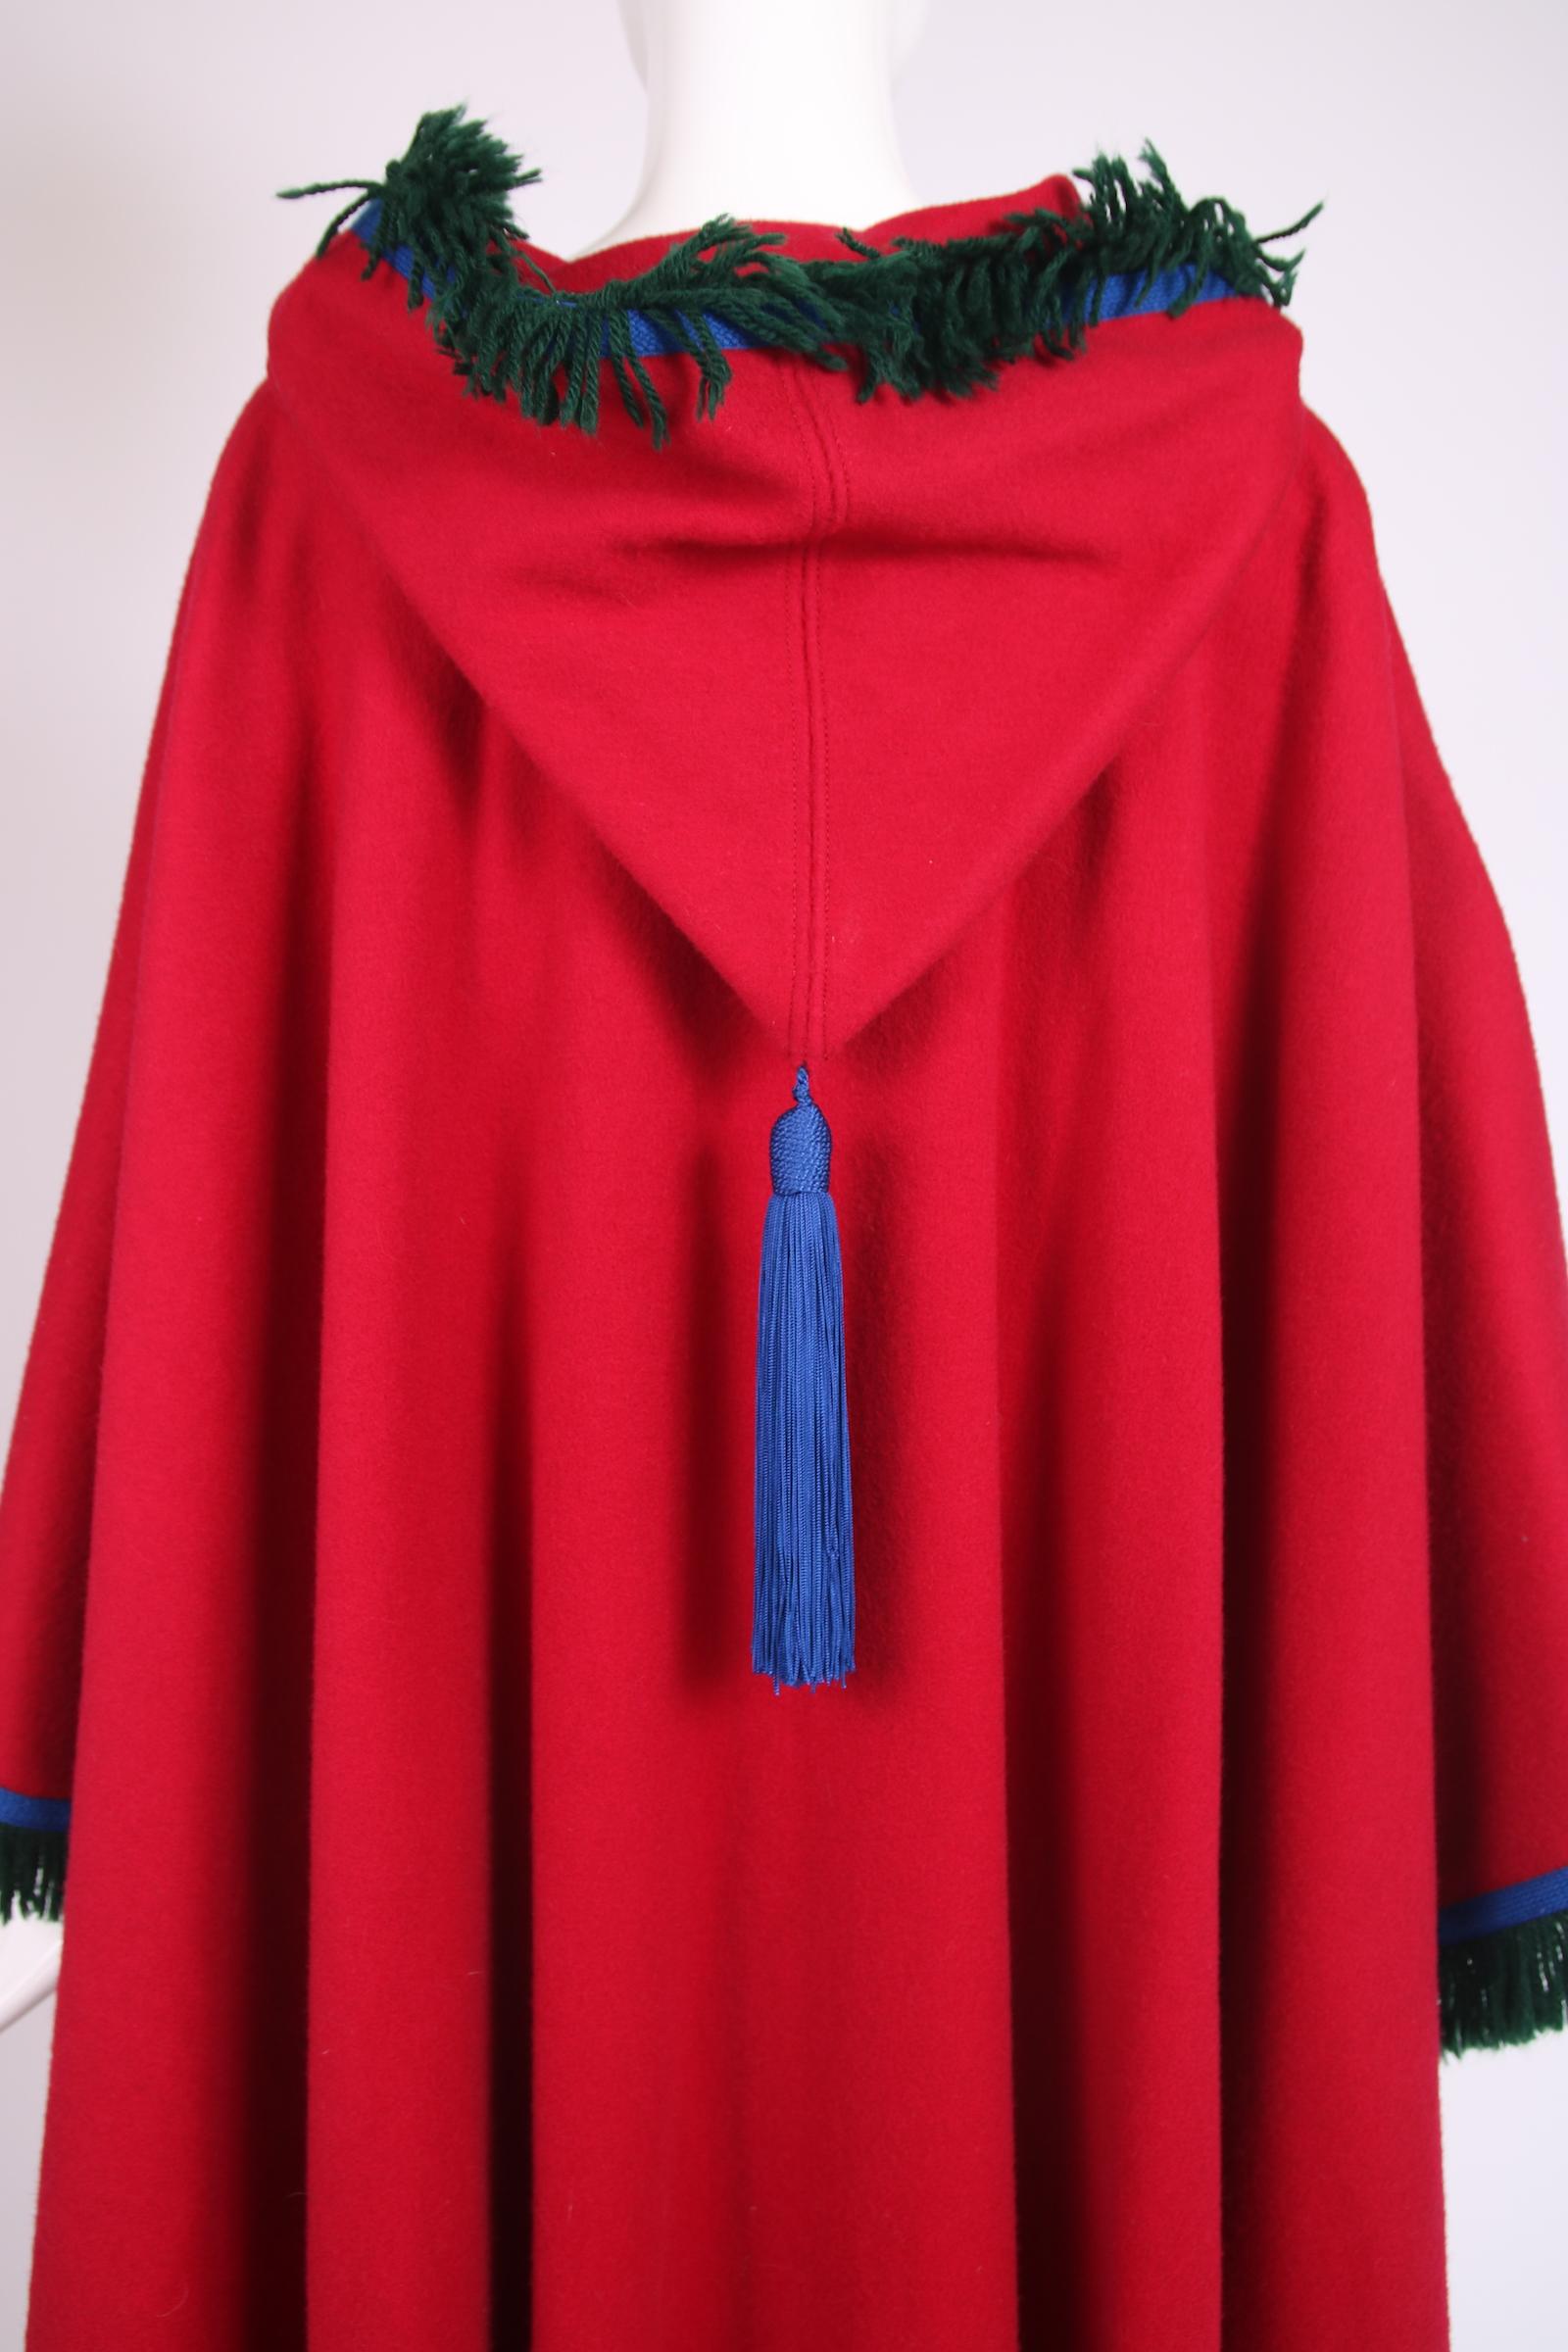 Yves Saint Laurent Red Wool Hooded Cape w/Blue Trim & Green Fringe 1970's In Excellent Condition For Sale In Studio City, CA